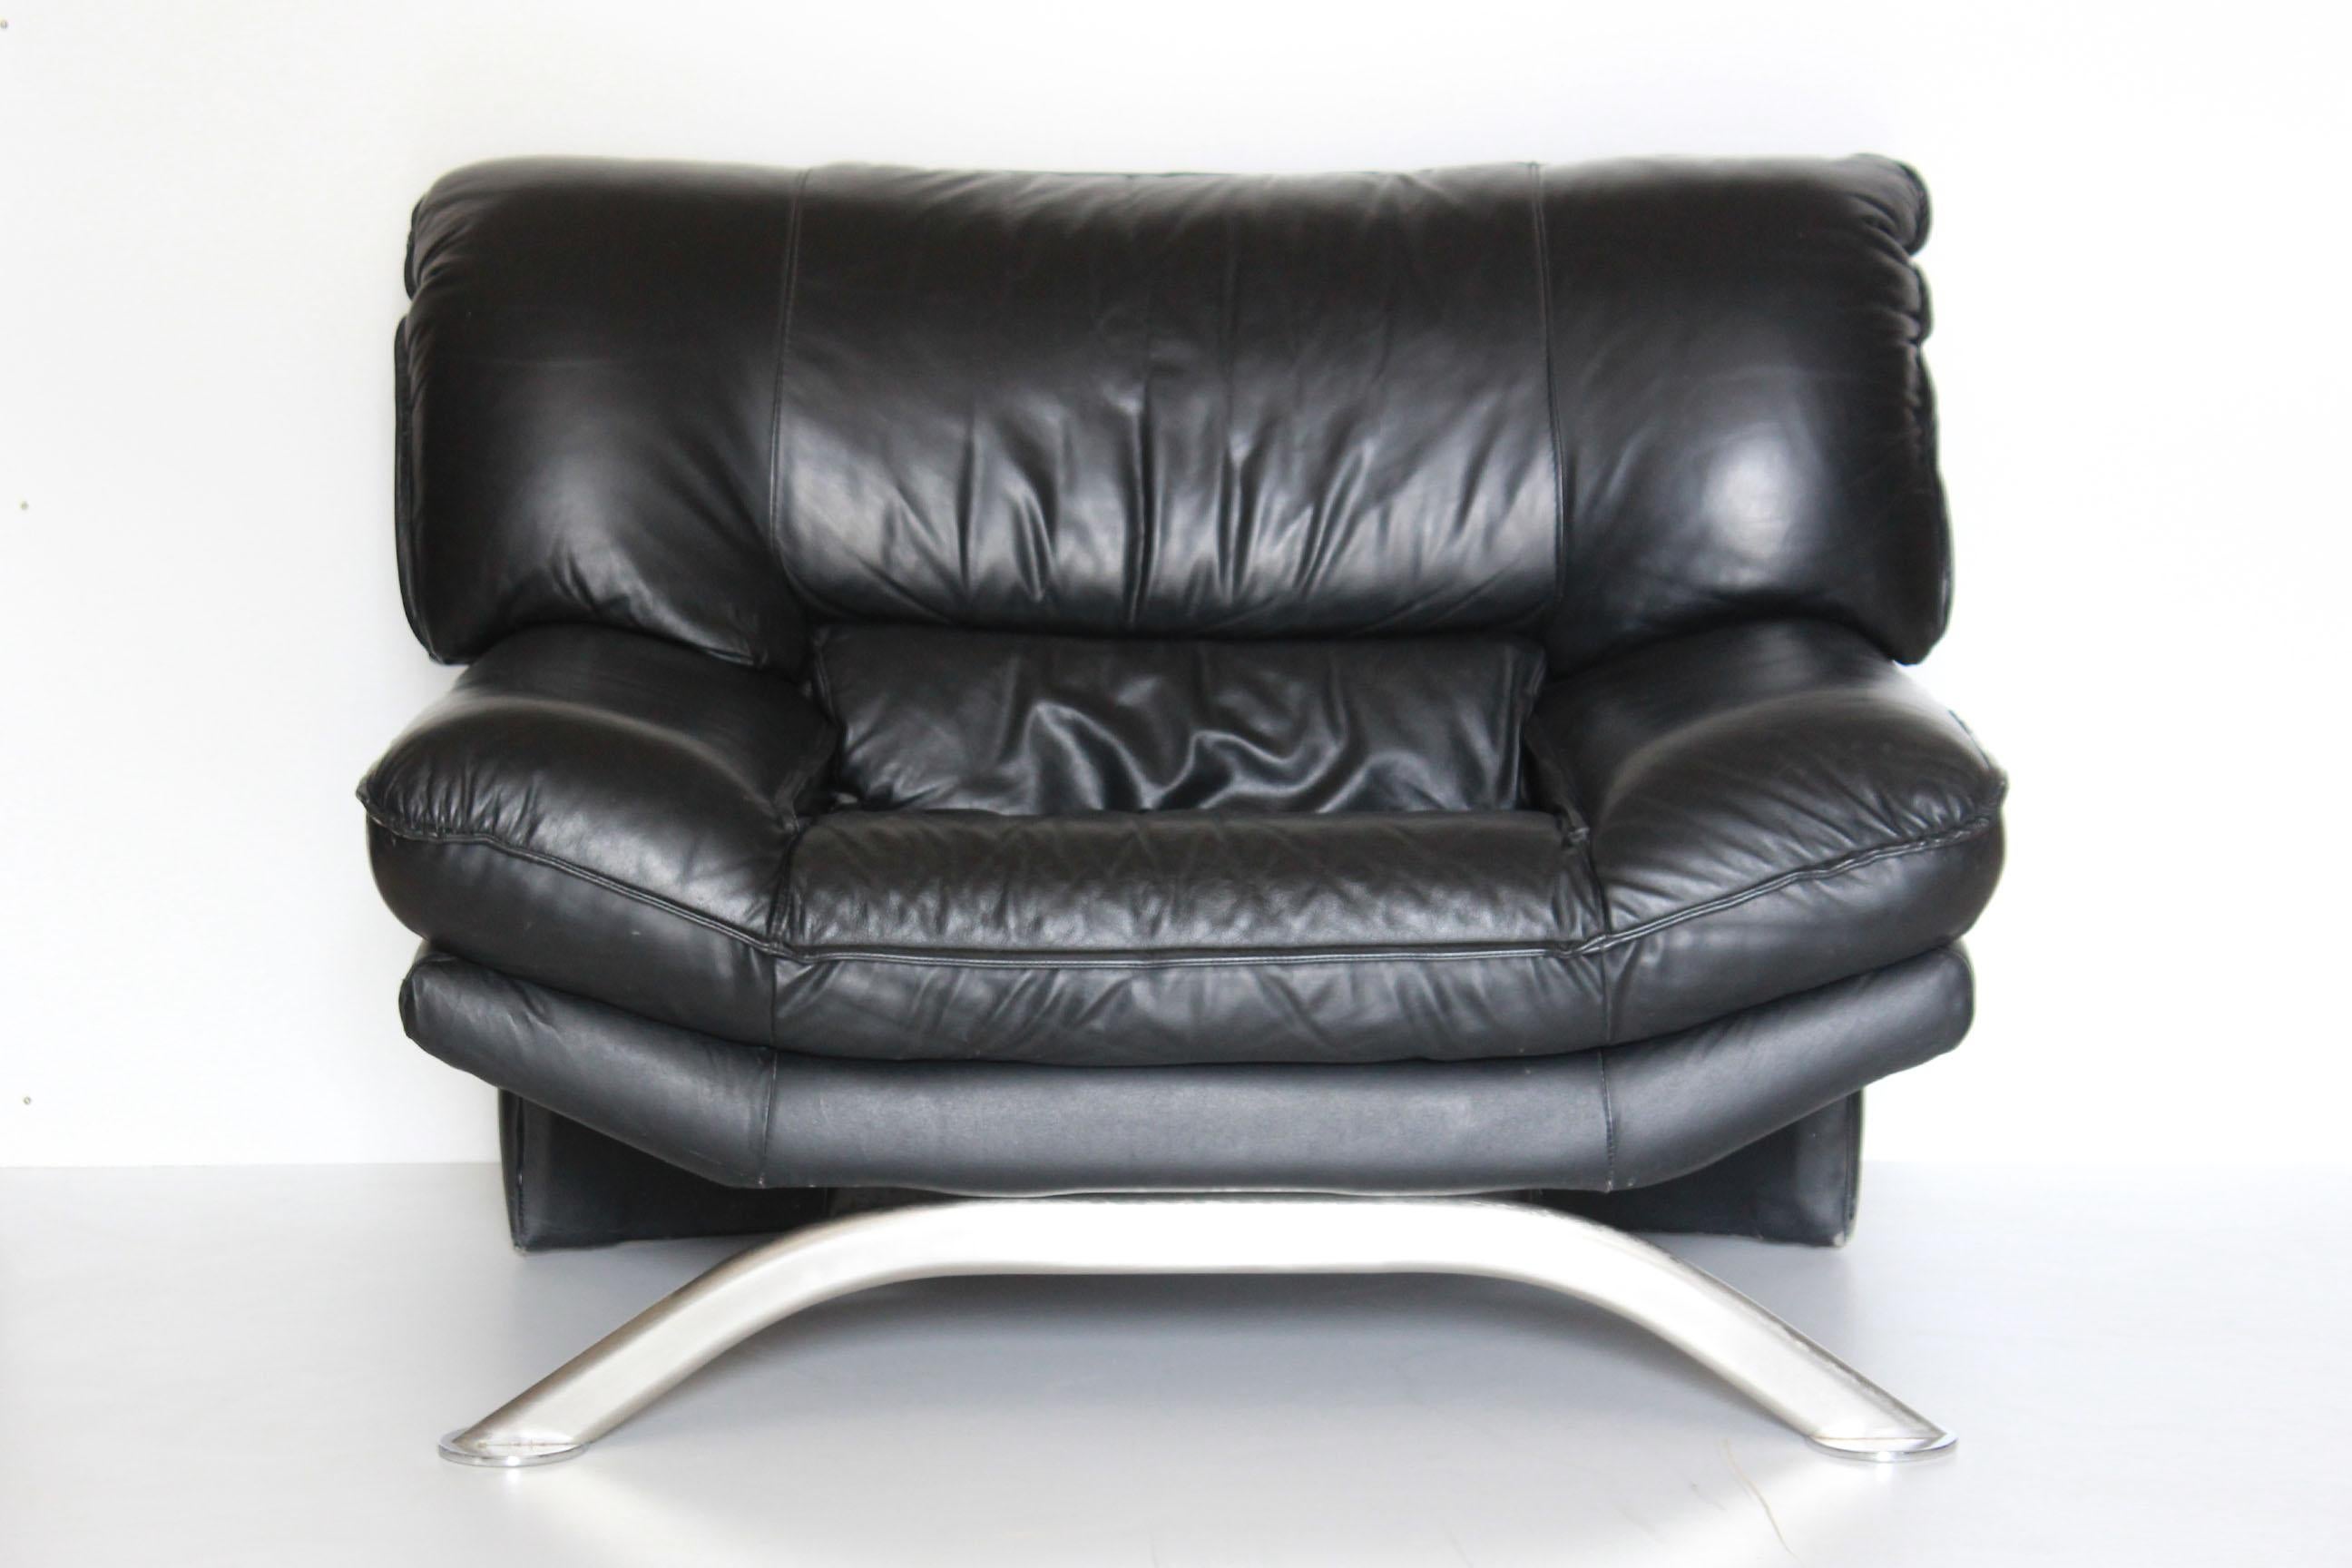 Vintage Black Leather Armchair, Italy 1980s.
Large black leather armchairs with iron structure. I very good conditions with only few signs of time. Leather has been cleaned and polished. Two units available. Price to be meant for each unit.